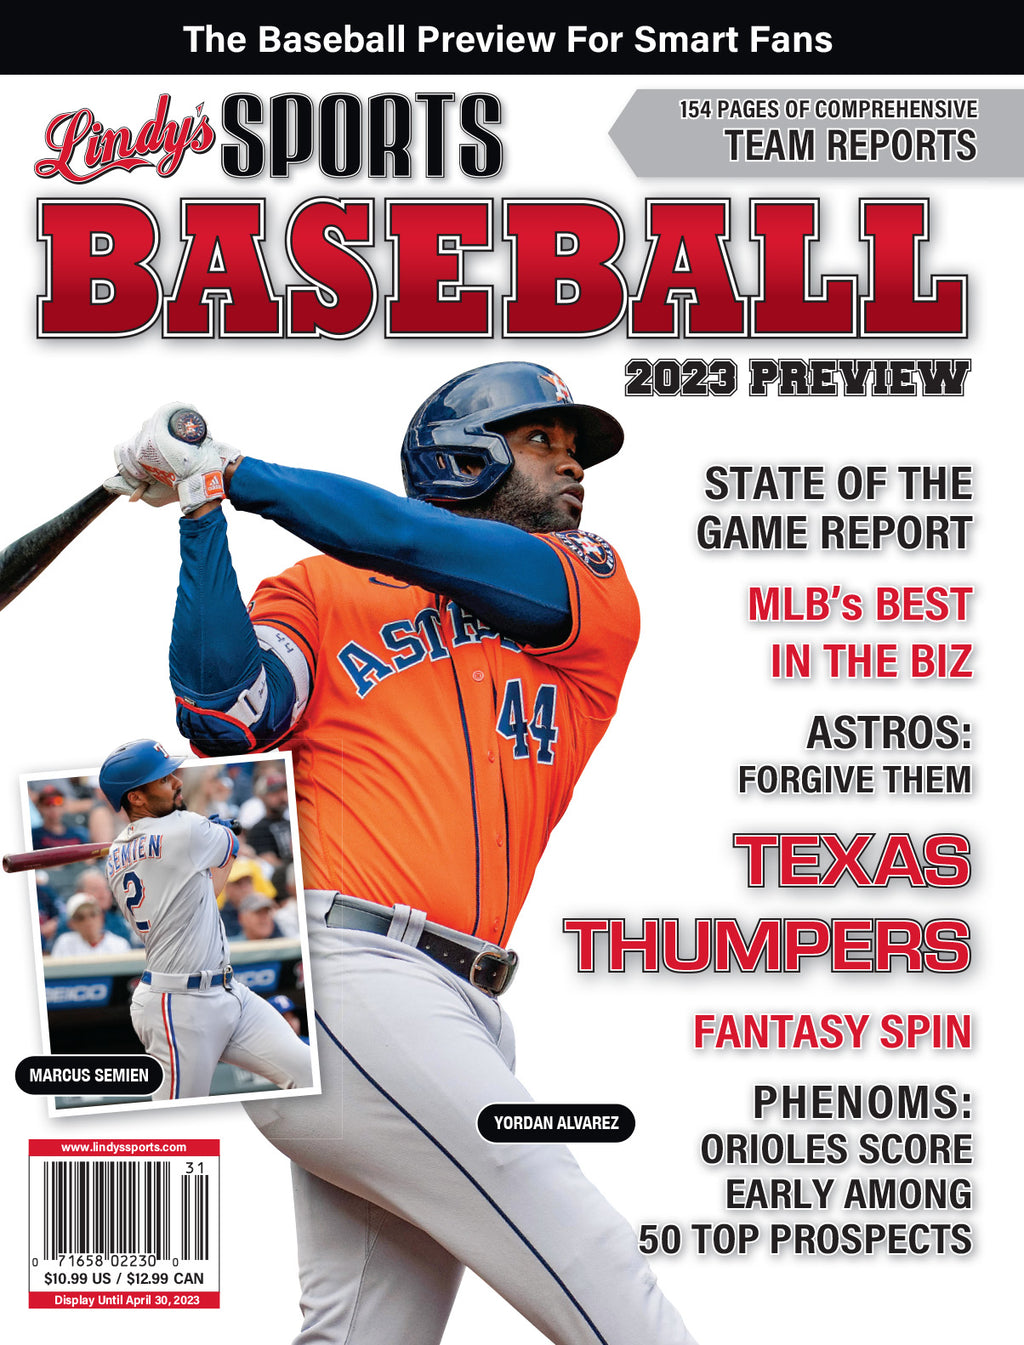 2009 MLB Season Preview, Predictions and Projections